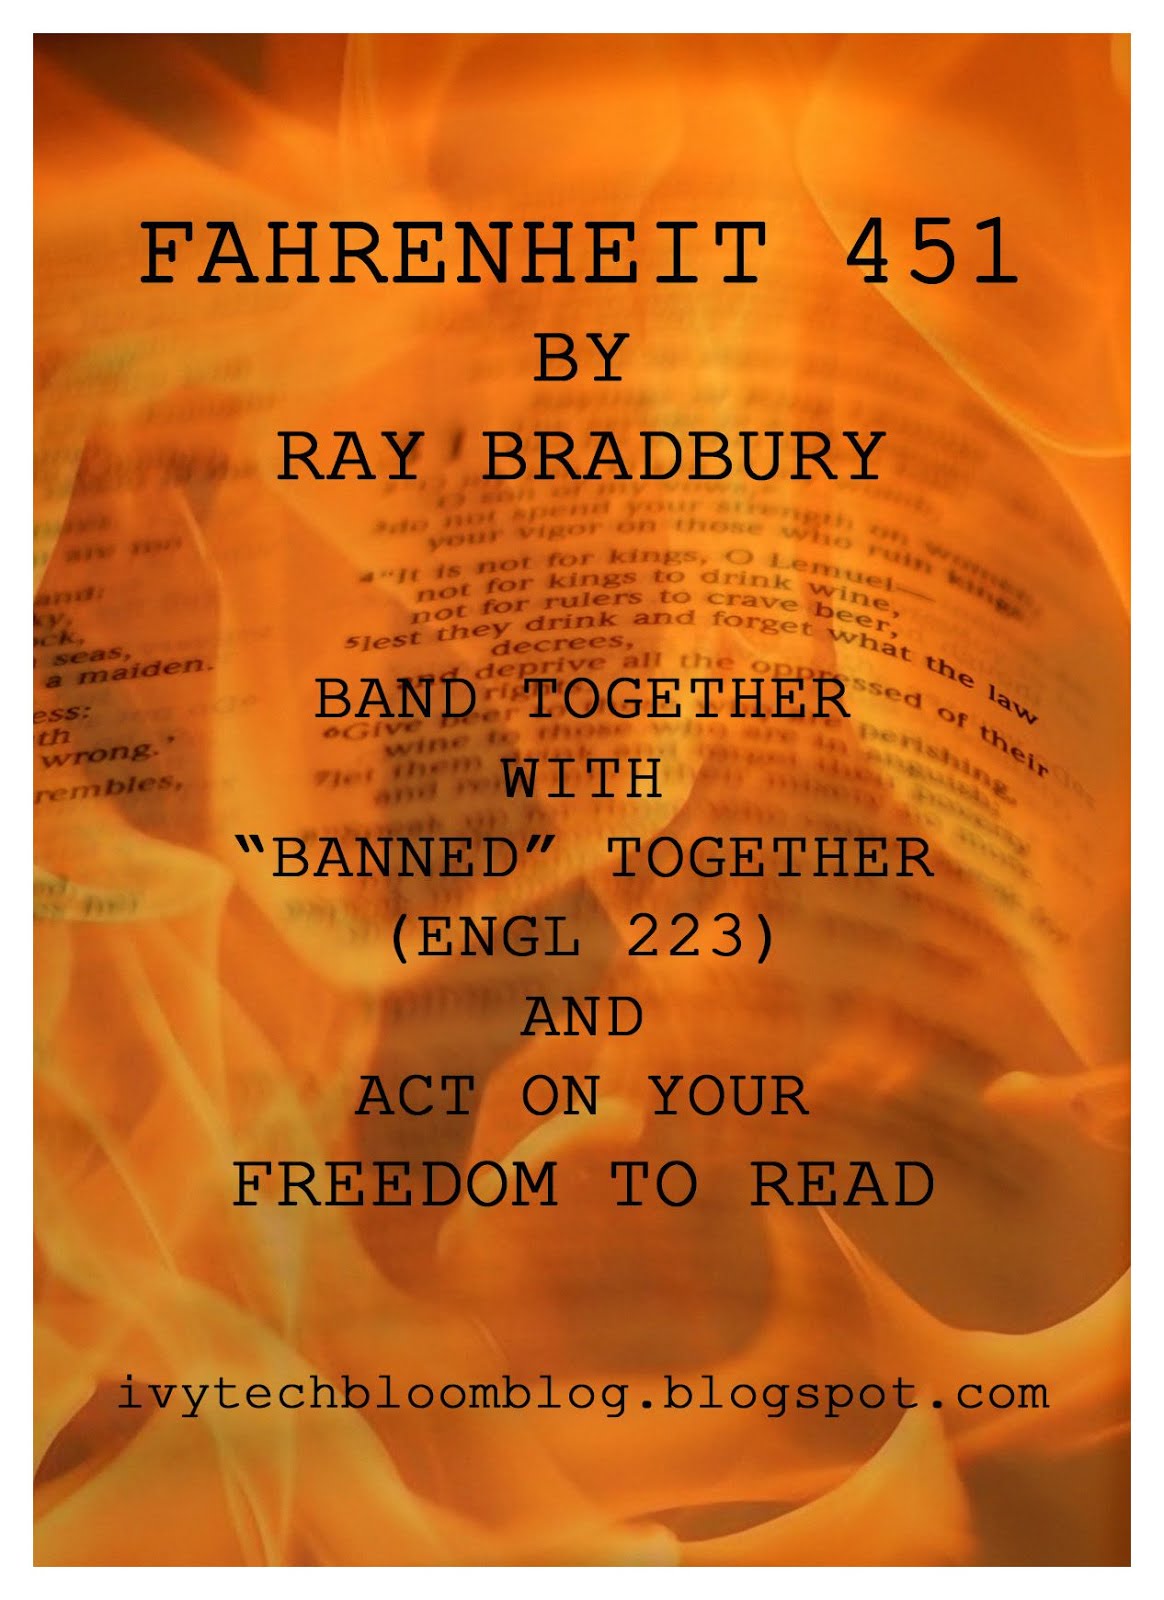 Why Is Fahrenheit 451 Banned